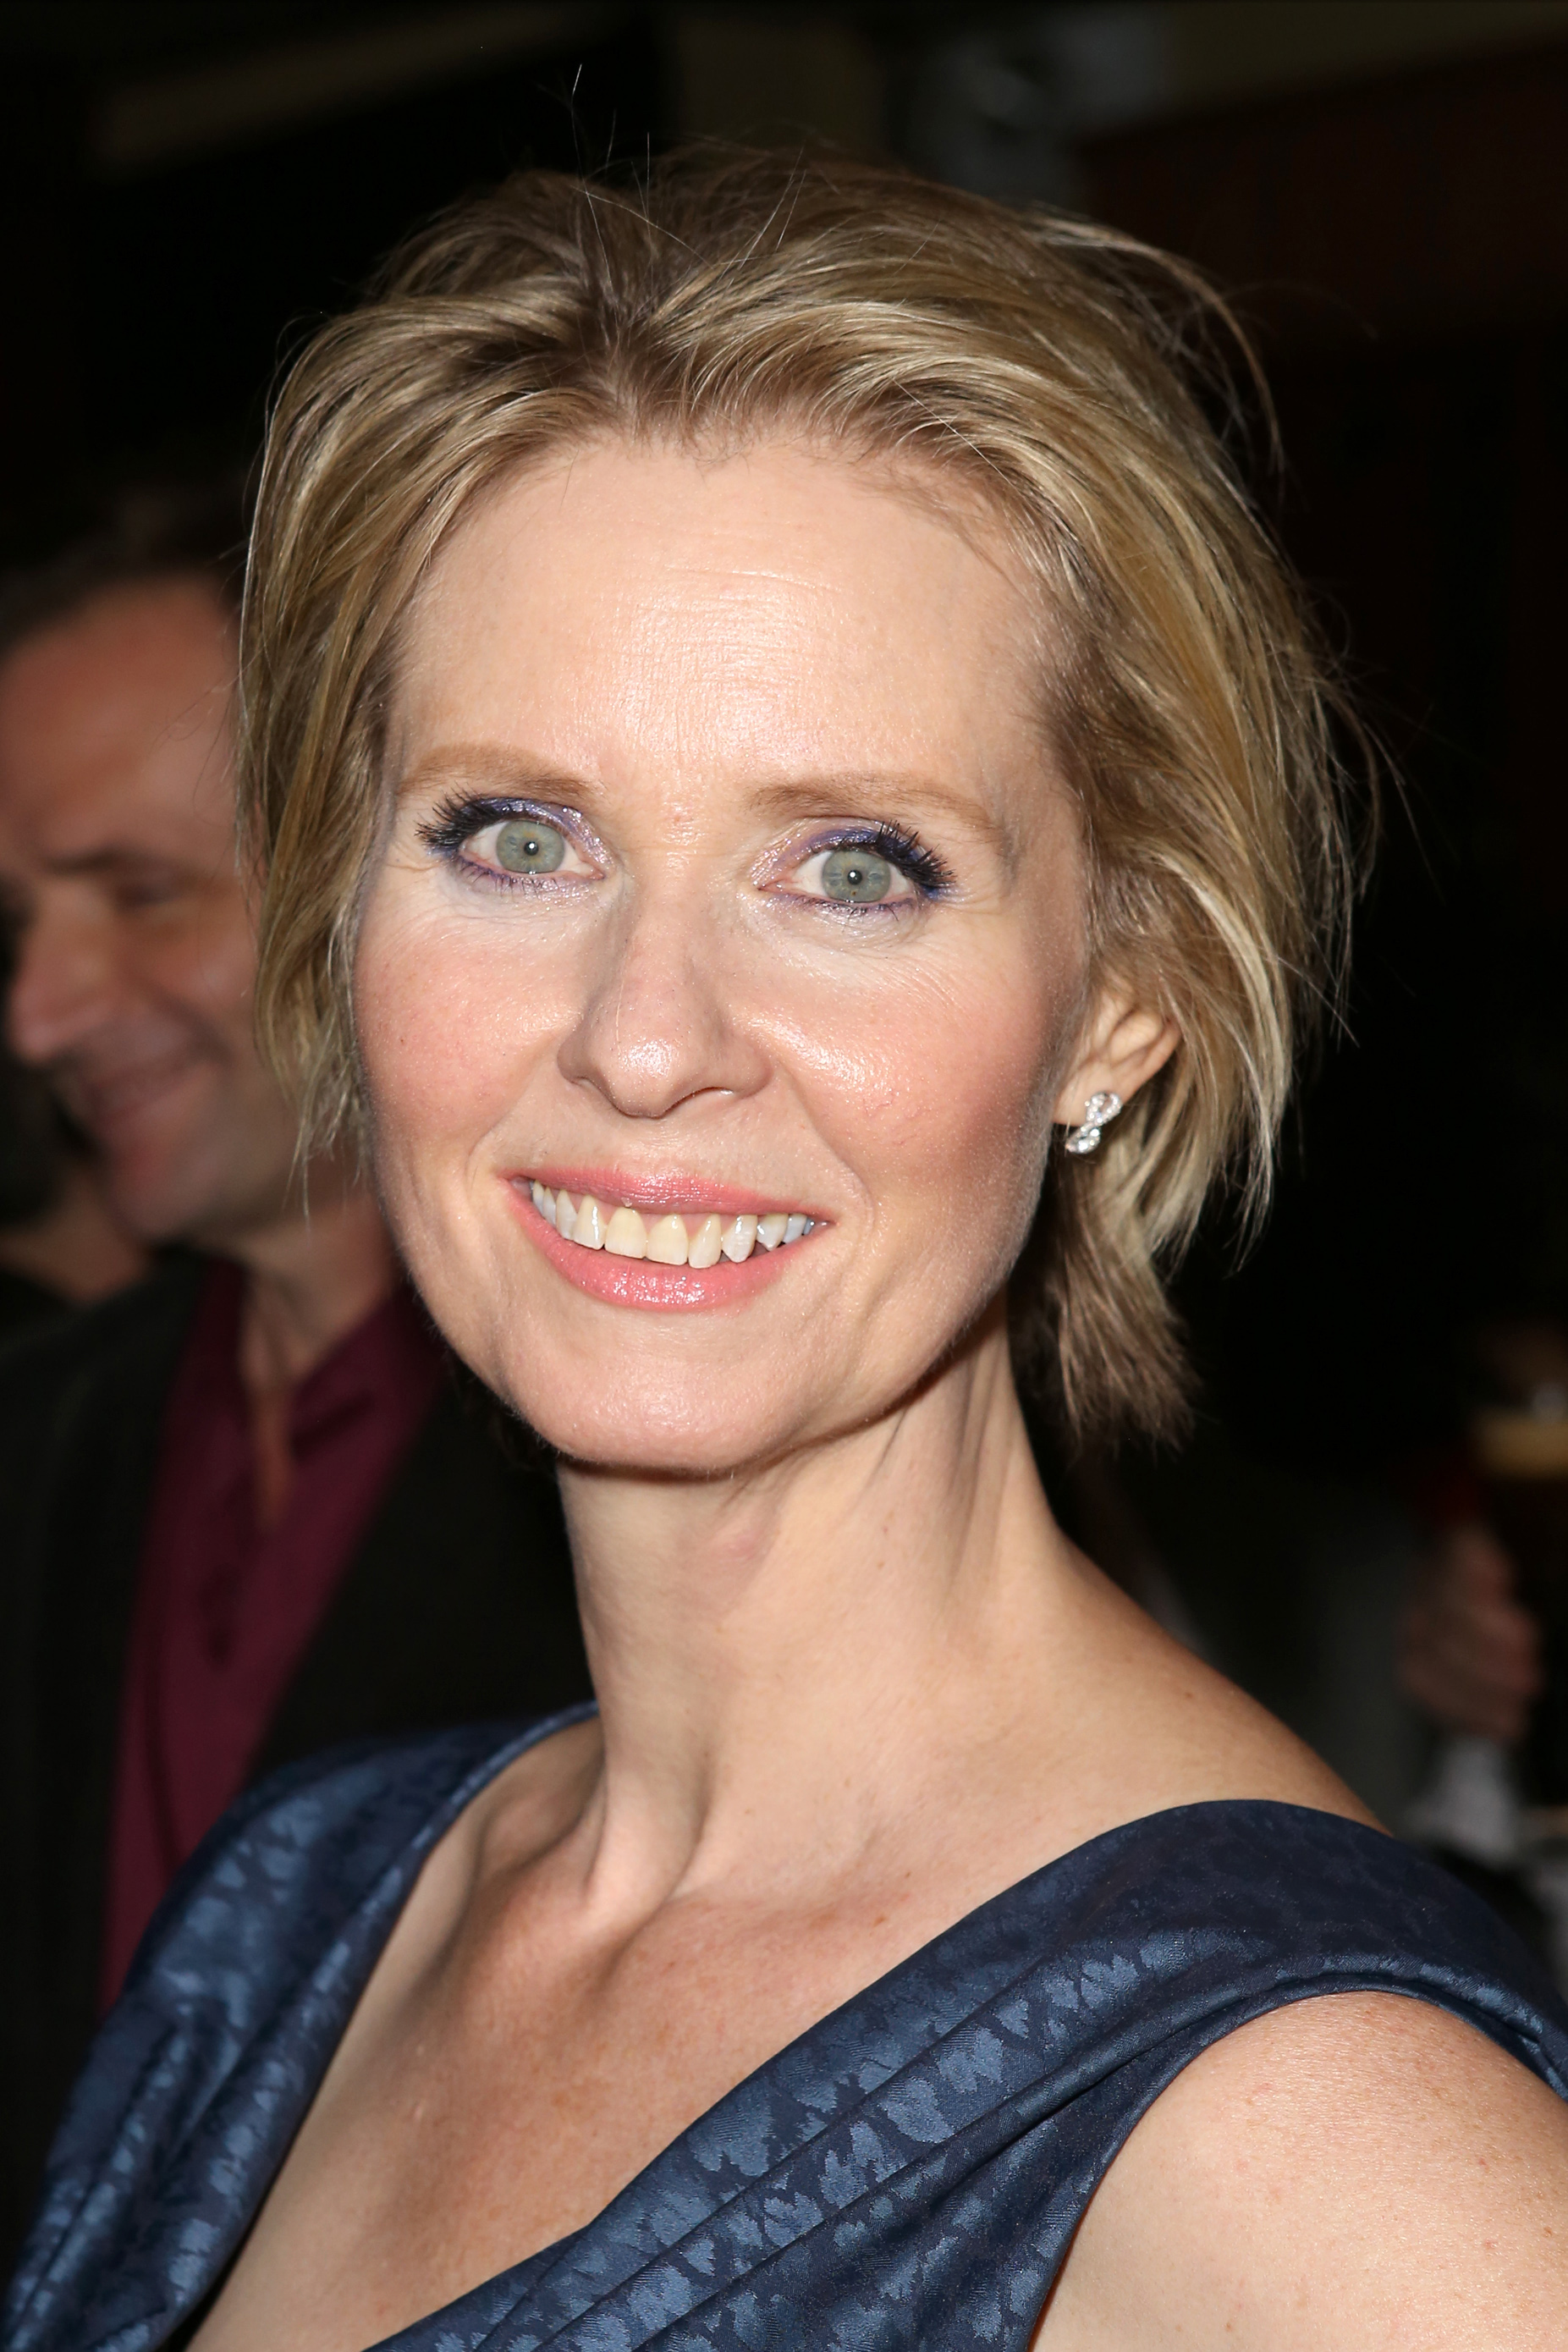 Cynthia Nixon attends the Opening Night Party for the New Group production of 'Steve' at the West Bank Cafe in New York City on Nov. 18, 2015. (Walter McBride—Getty Images)